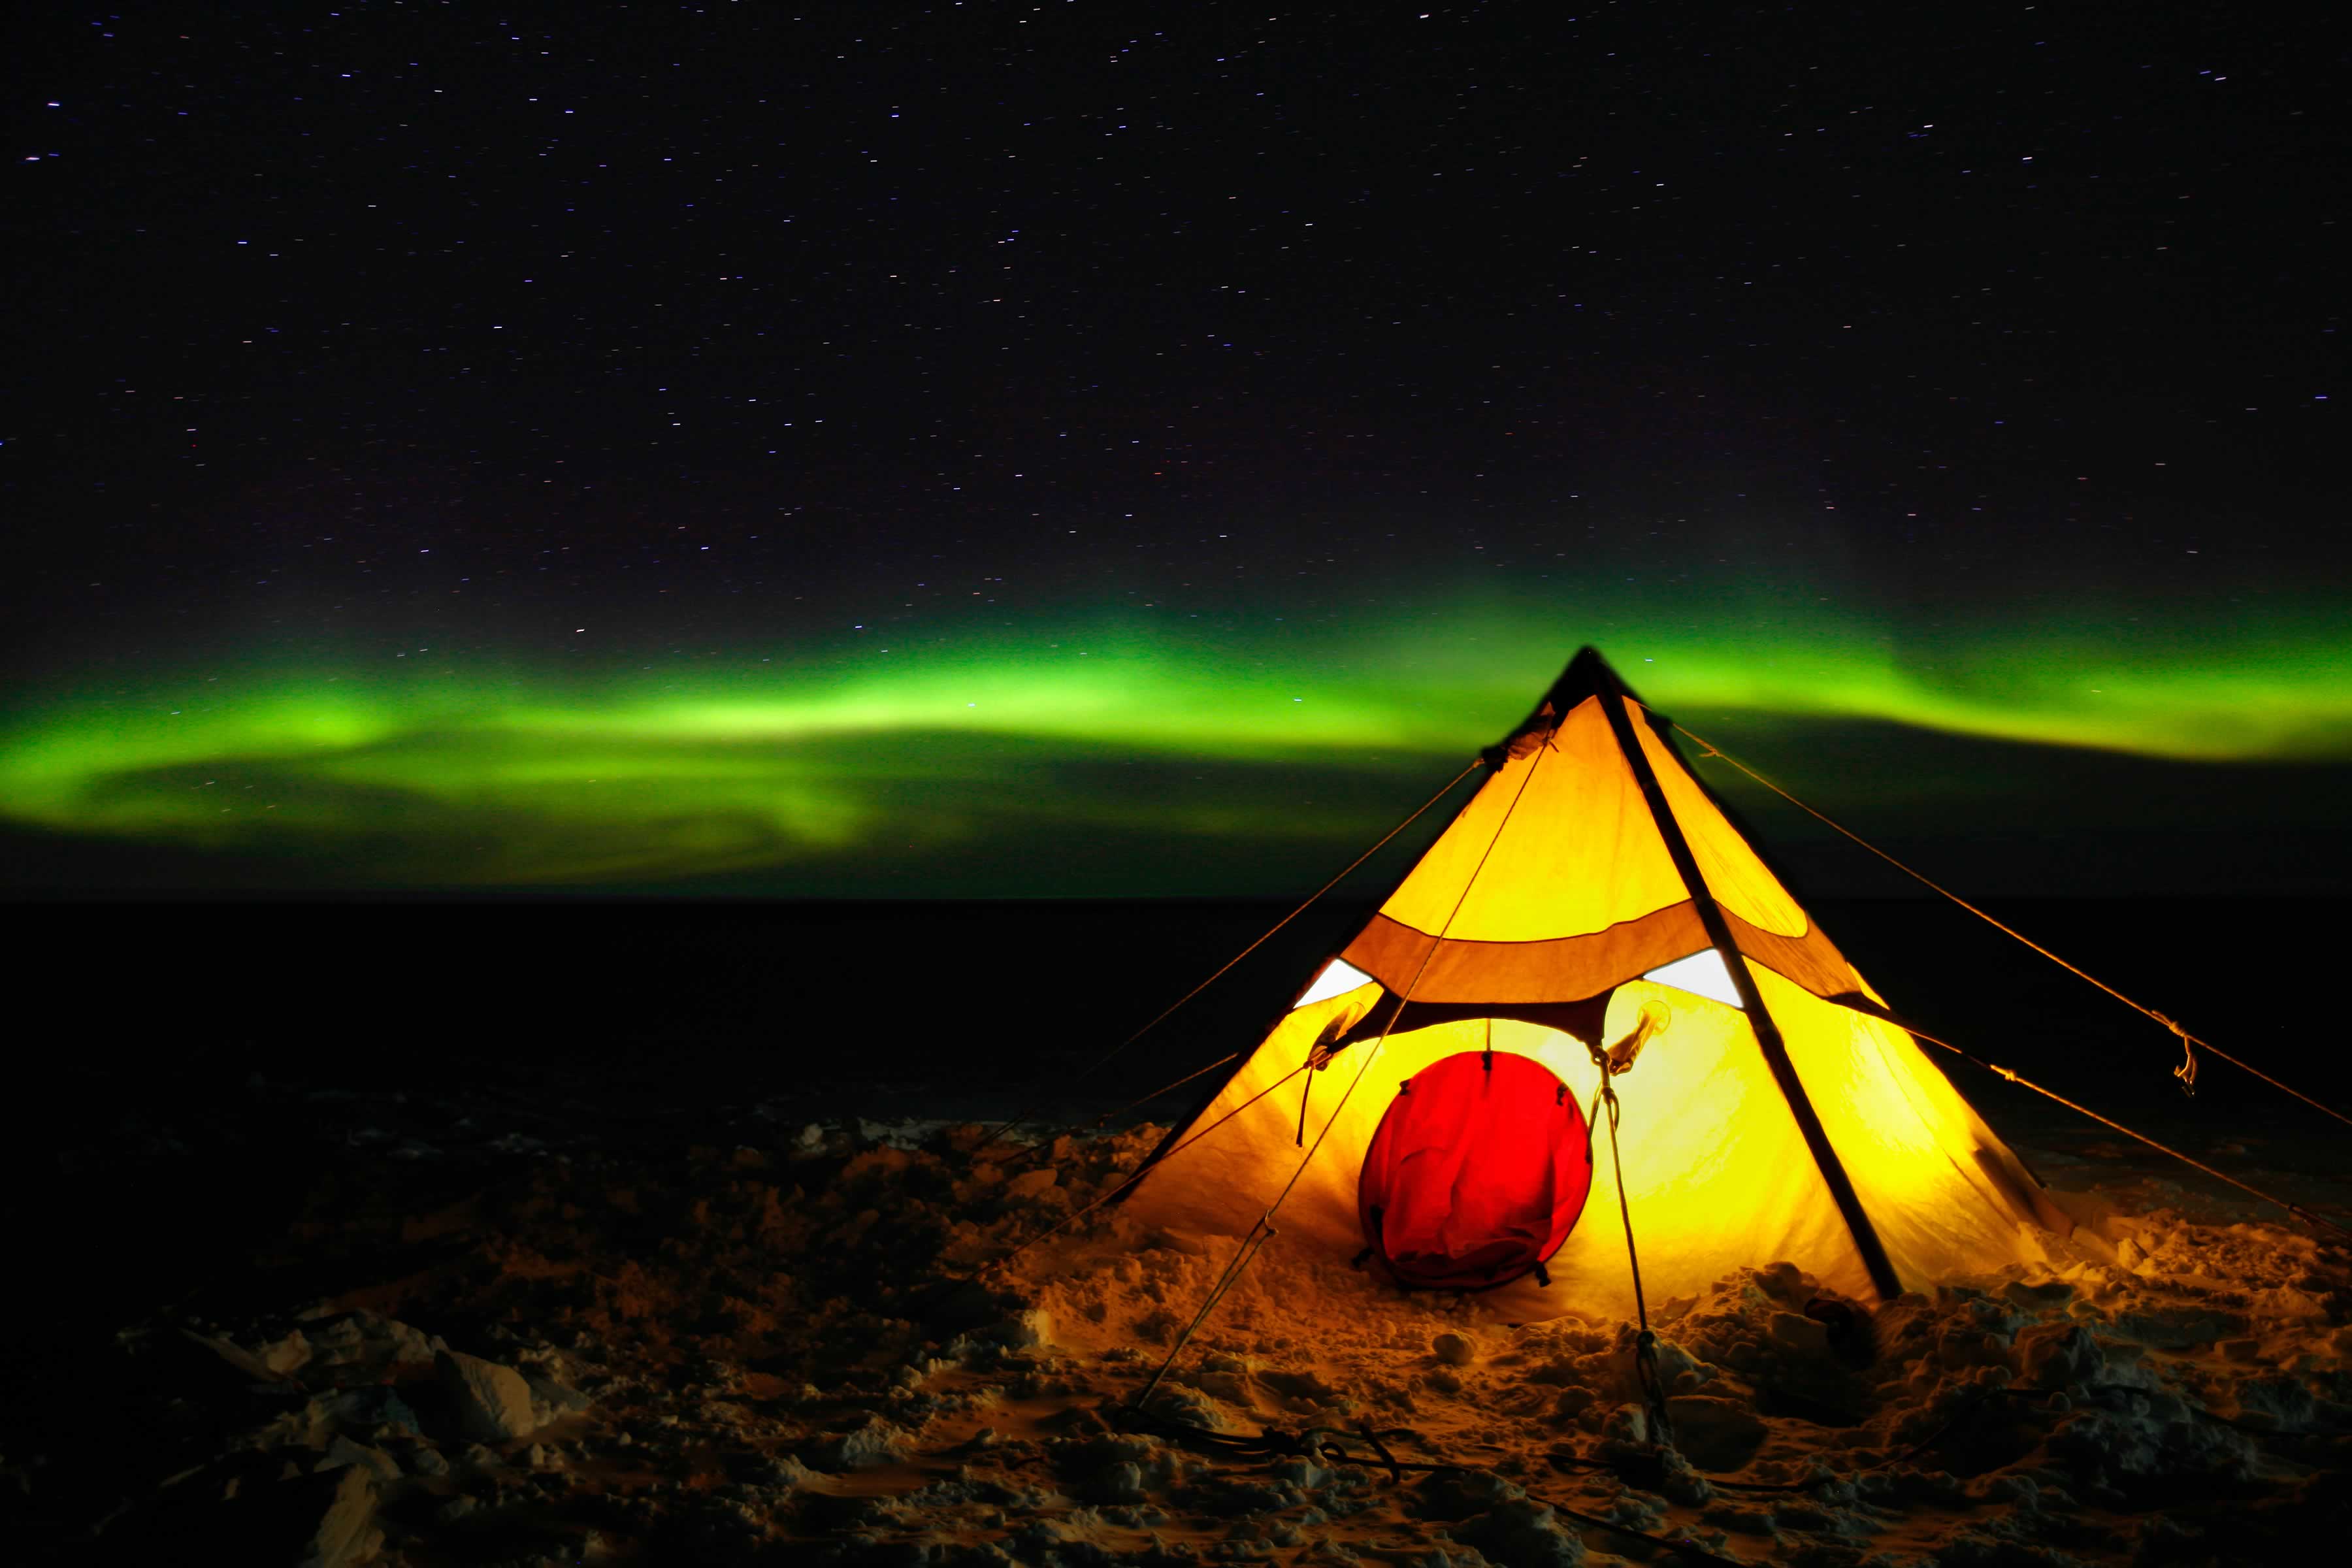 Light from within the tent contrasted against green aurora in the night sky. Photo: Christopher (Chris) Wilson.